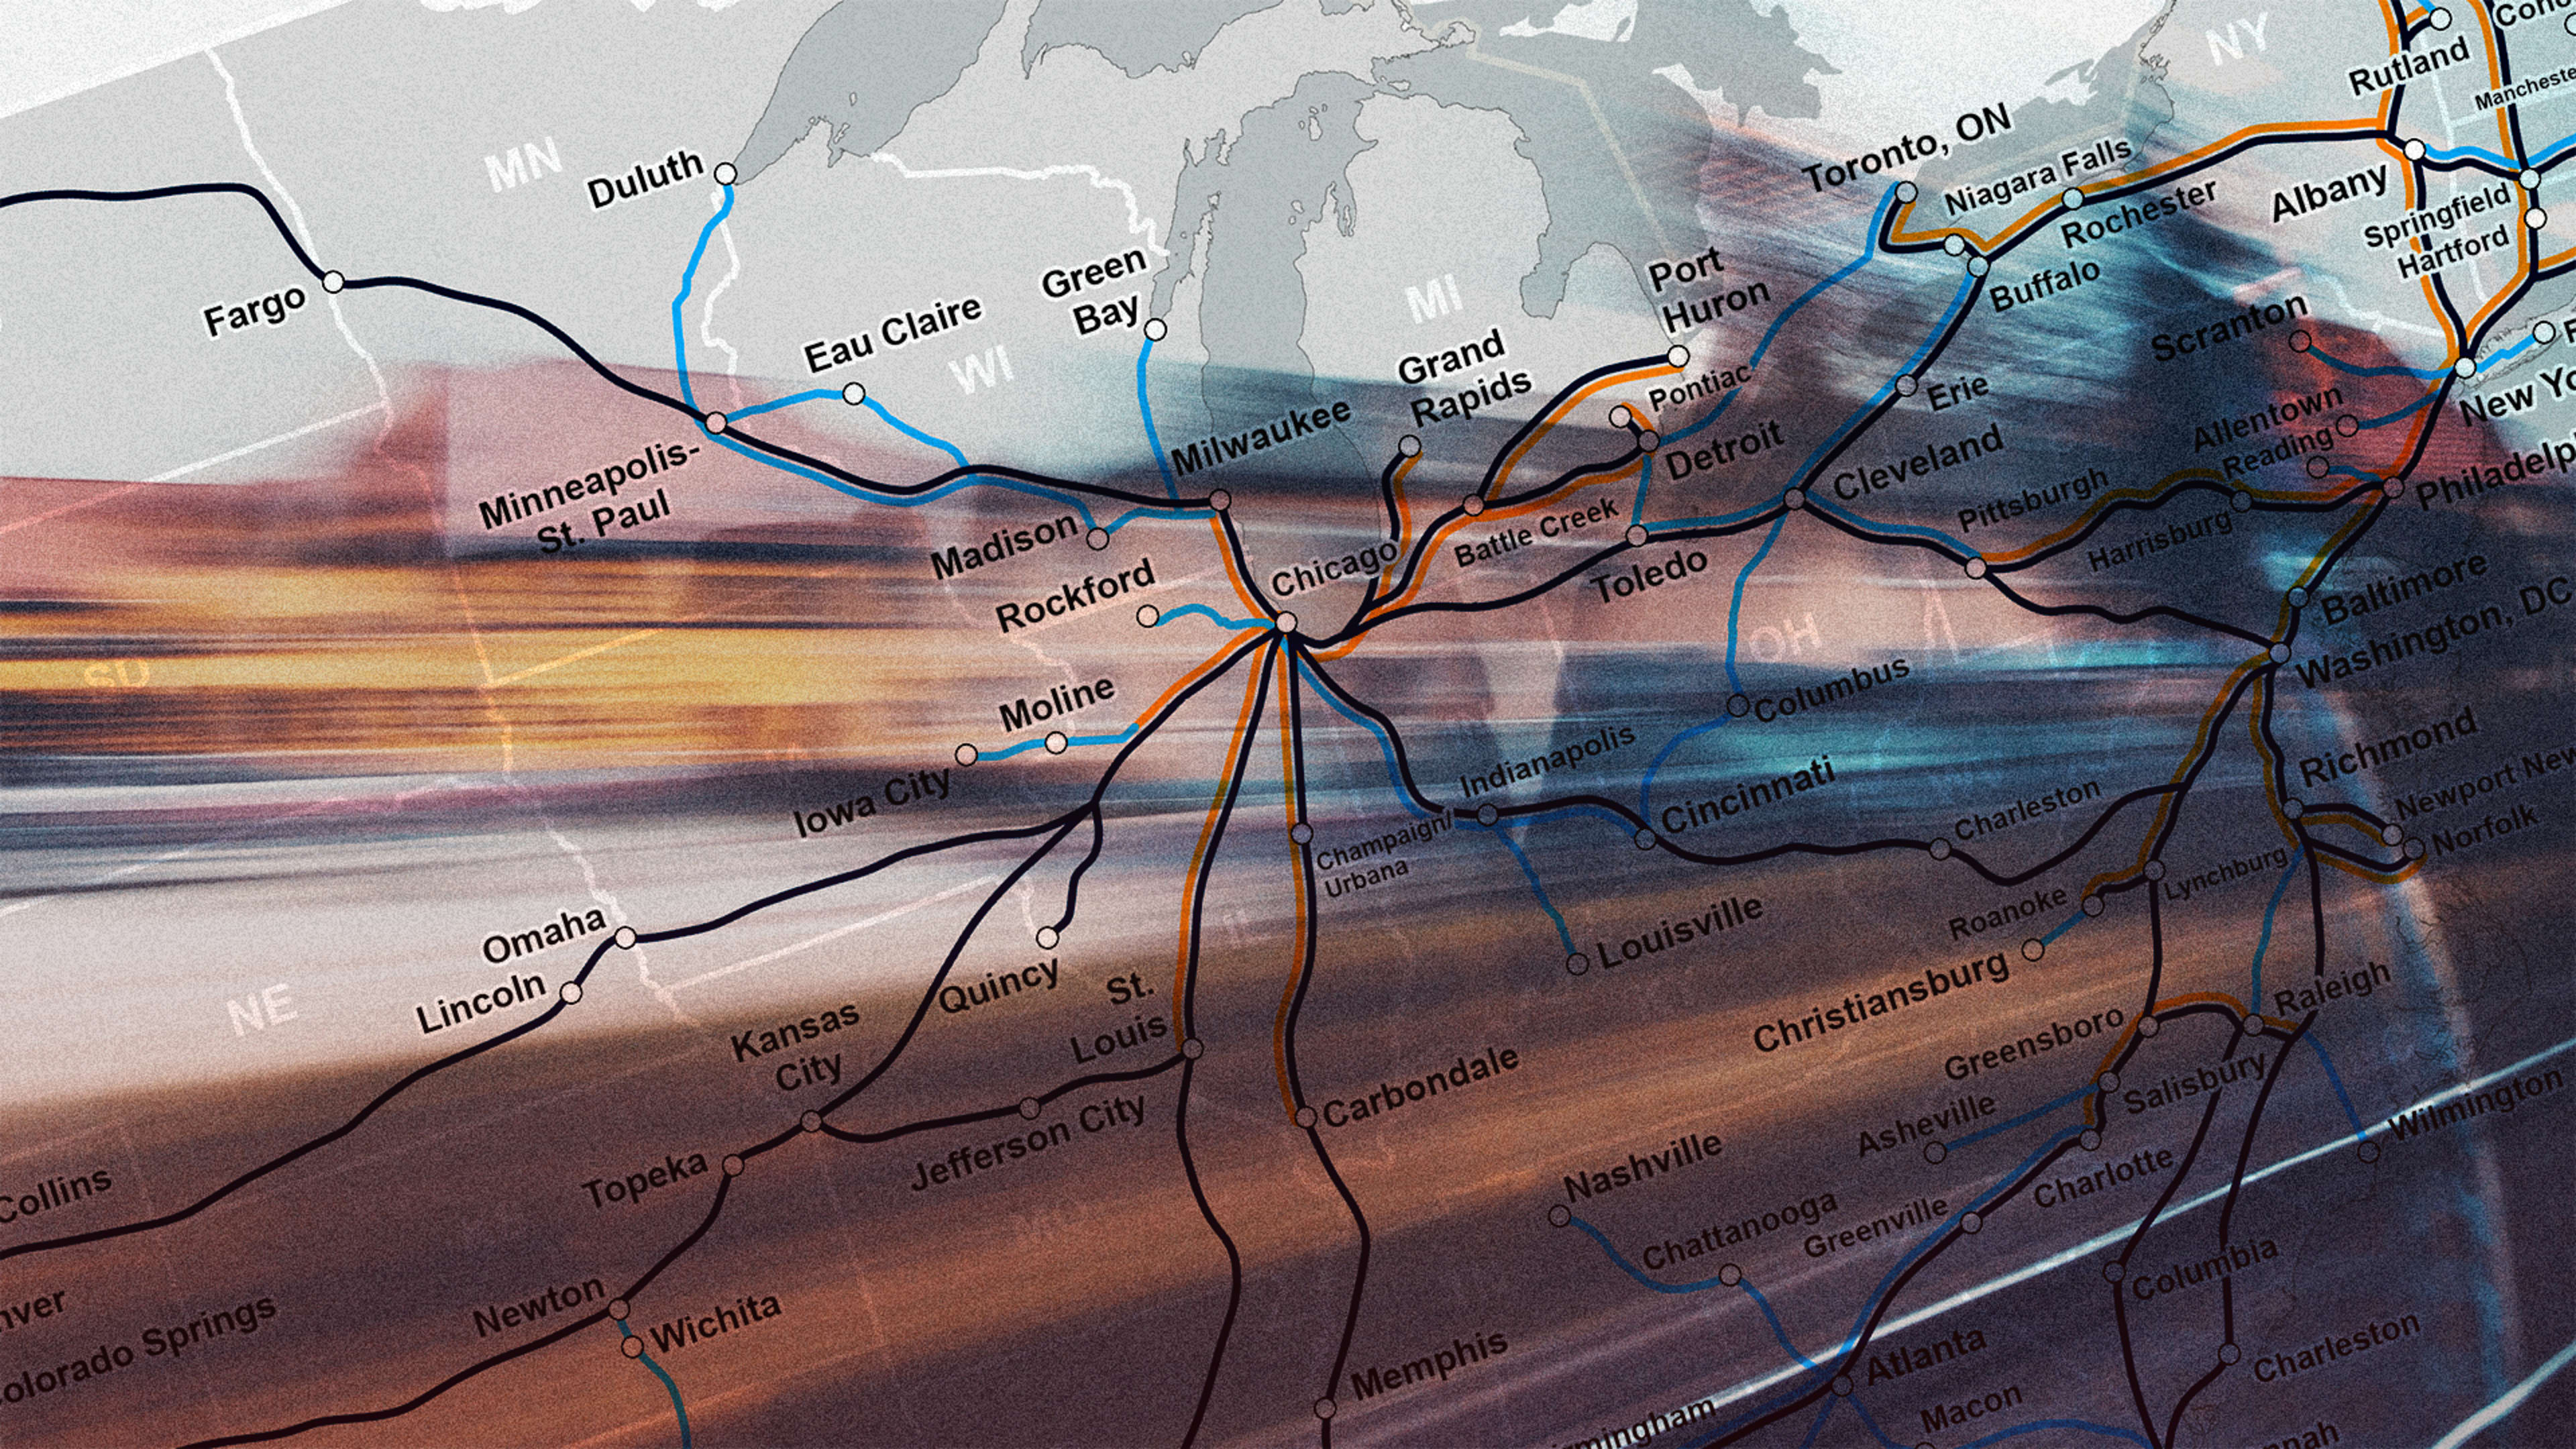 This Amtrak train map imagines an optimistic future with a lot more rail service by 2035